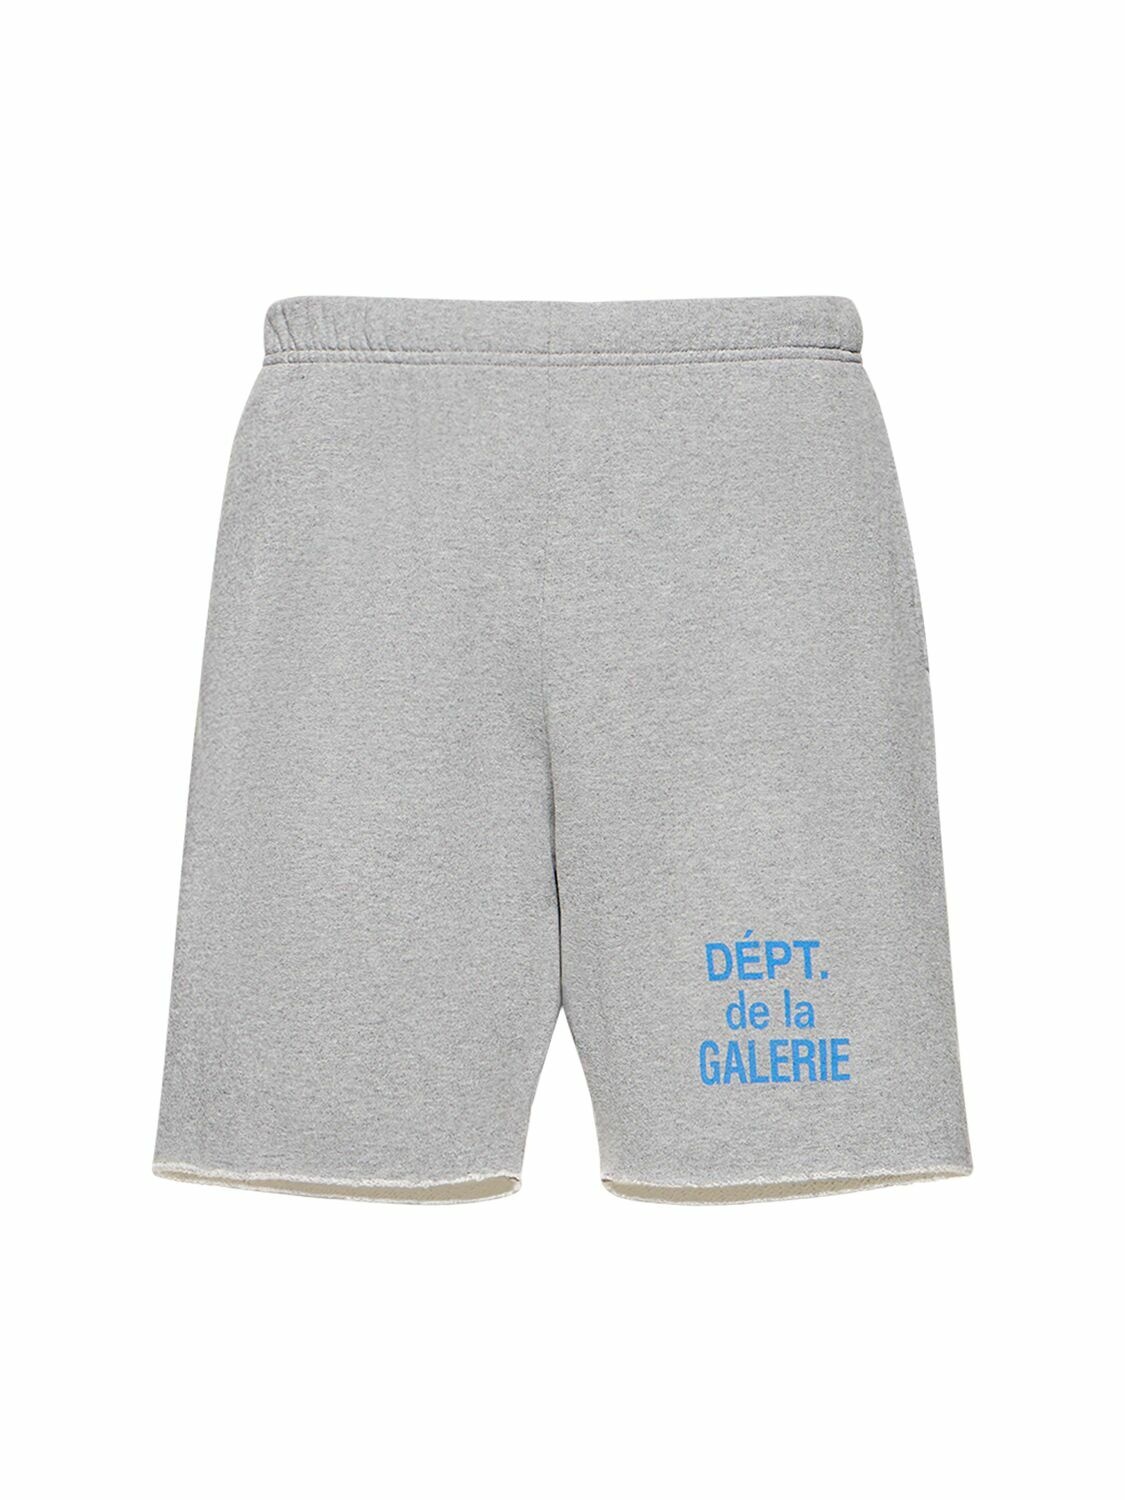 GALLERY DEPT. - French Logo Sweat Shorts